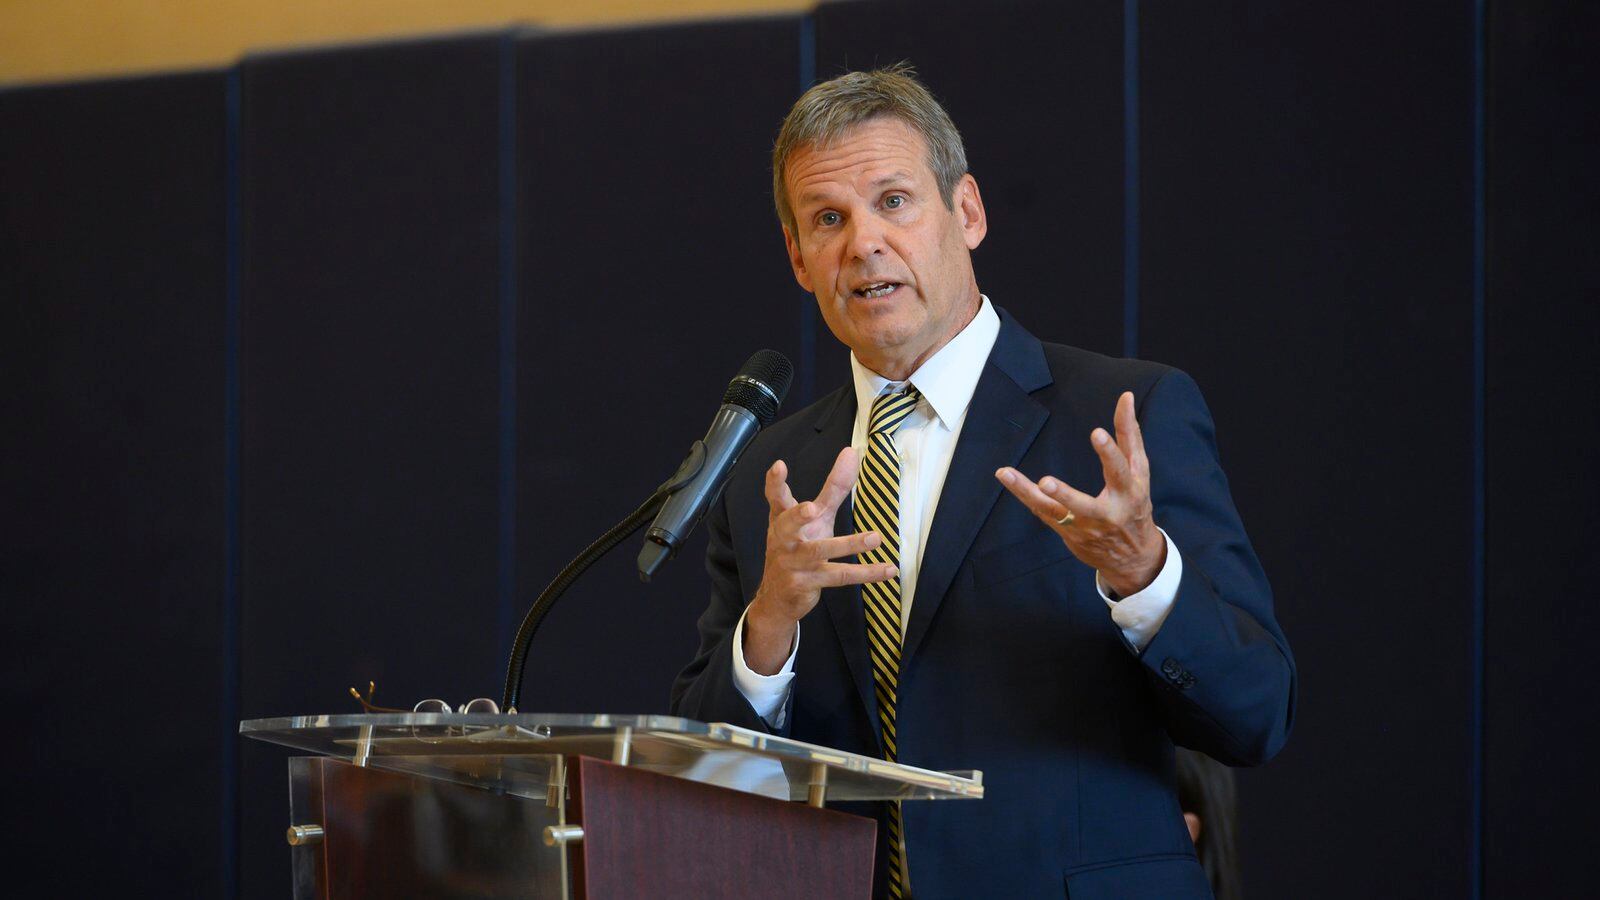 Gov. Bill Lee, a Republican businessman from Williamson County, took office in January of 2019.